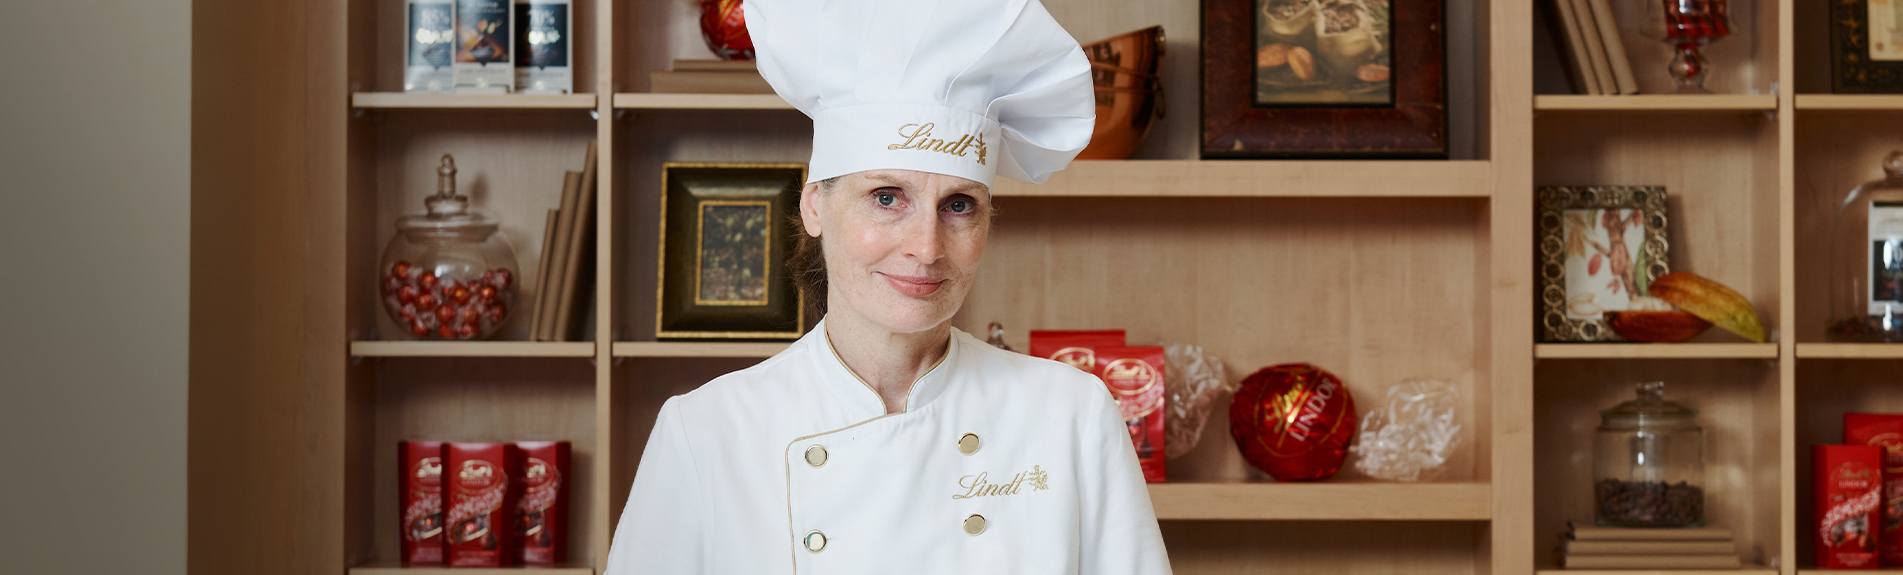 Lindt Chocolate Master